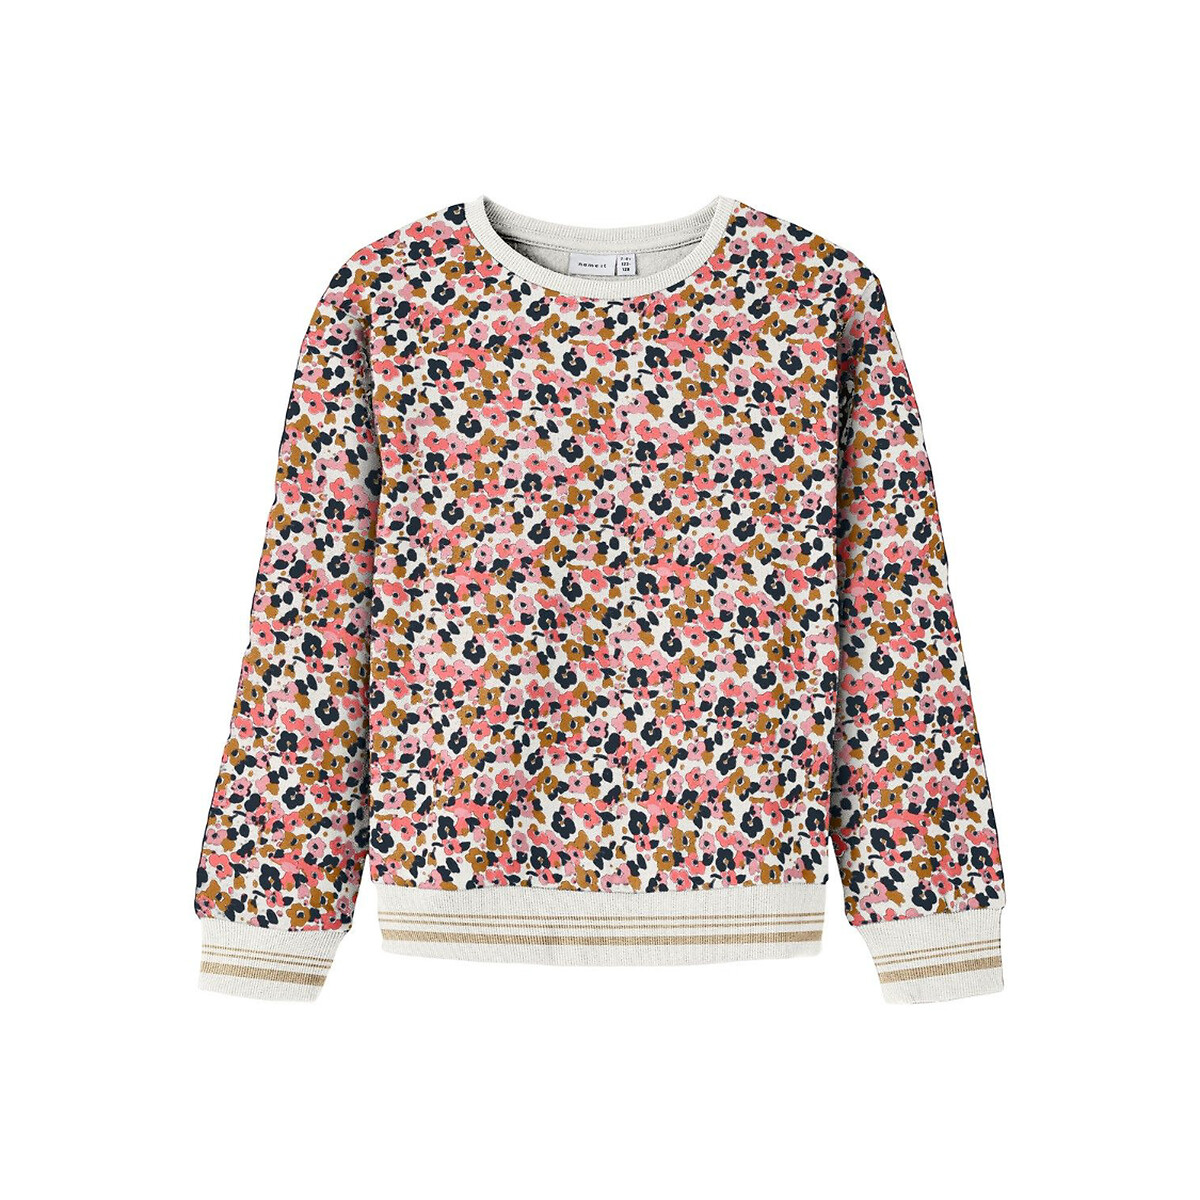 Image of Floral Print Cotton Sweatshirt with Crew Neck